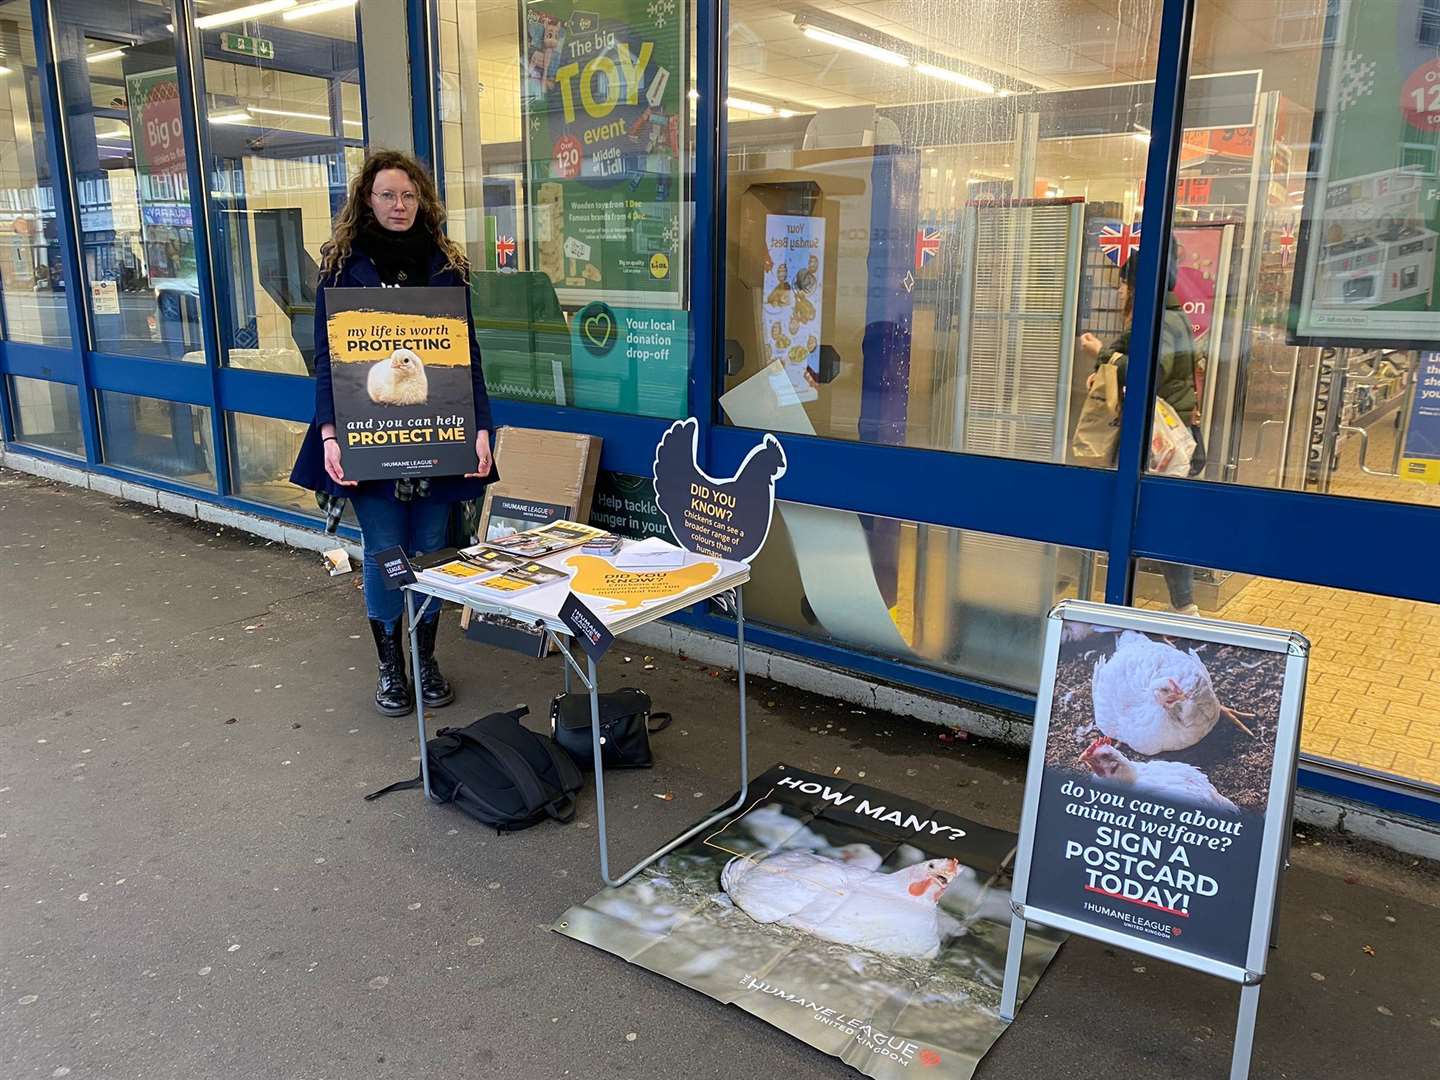 Protesters against animal cruelty demonstrated outside a Lidl branch in Tonbridge today. Picture: Matthew Chalmers